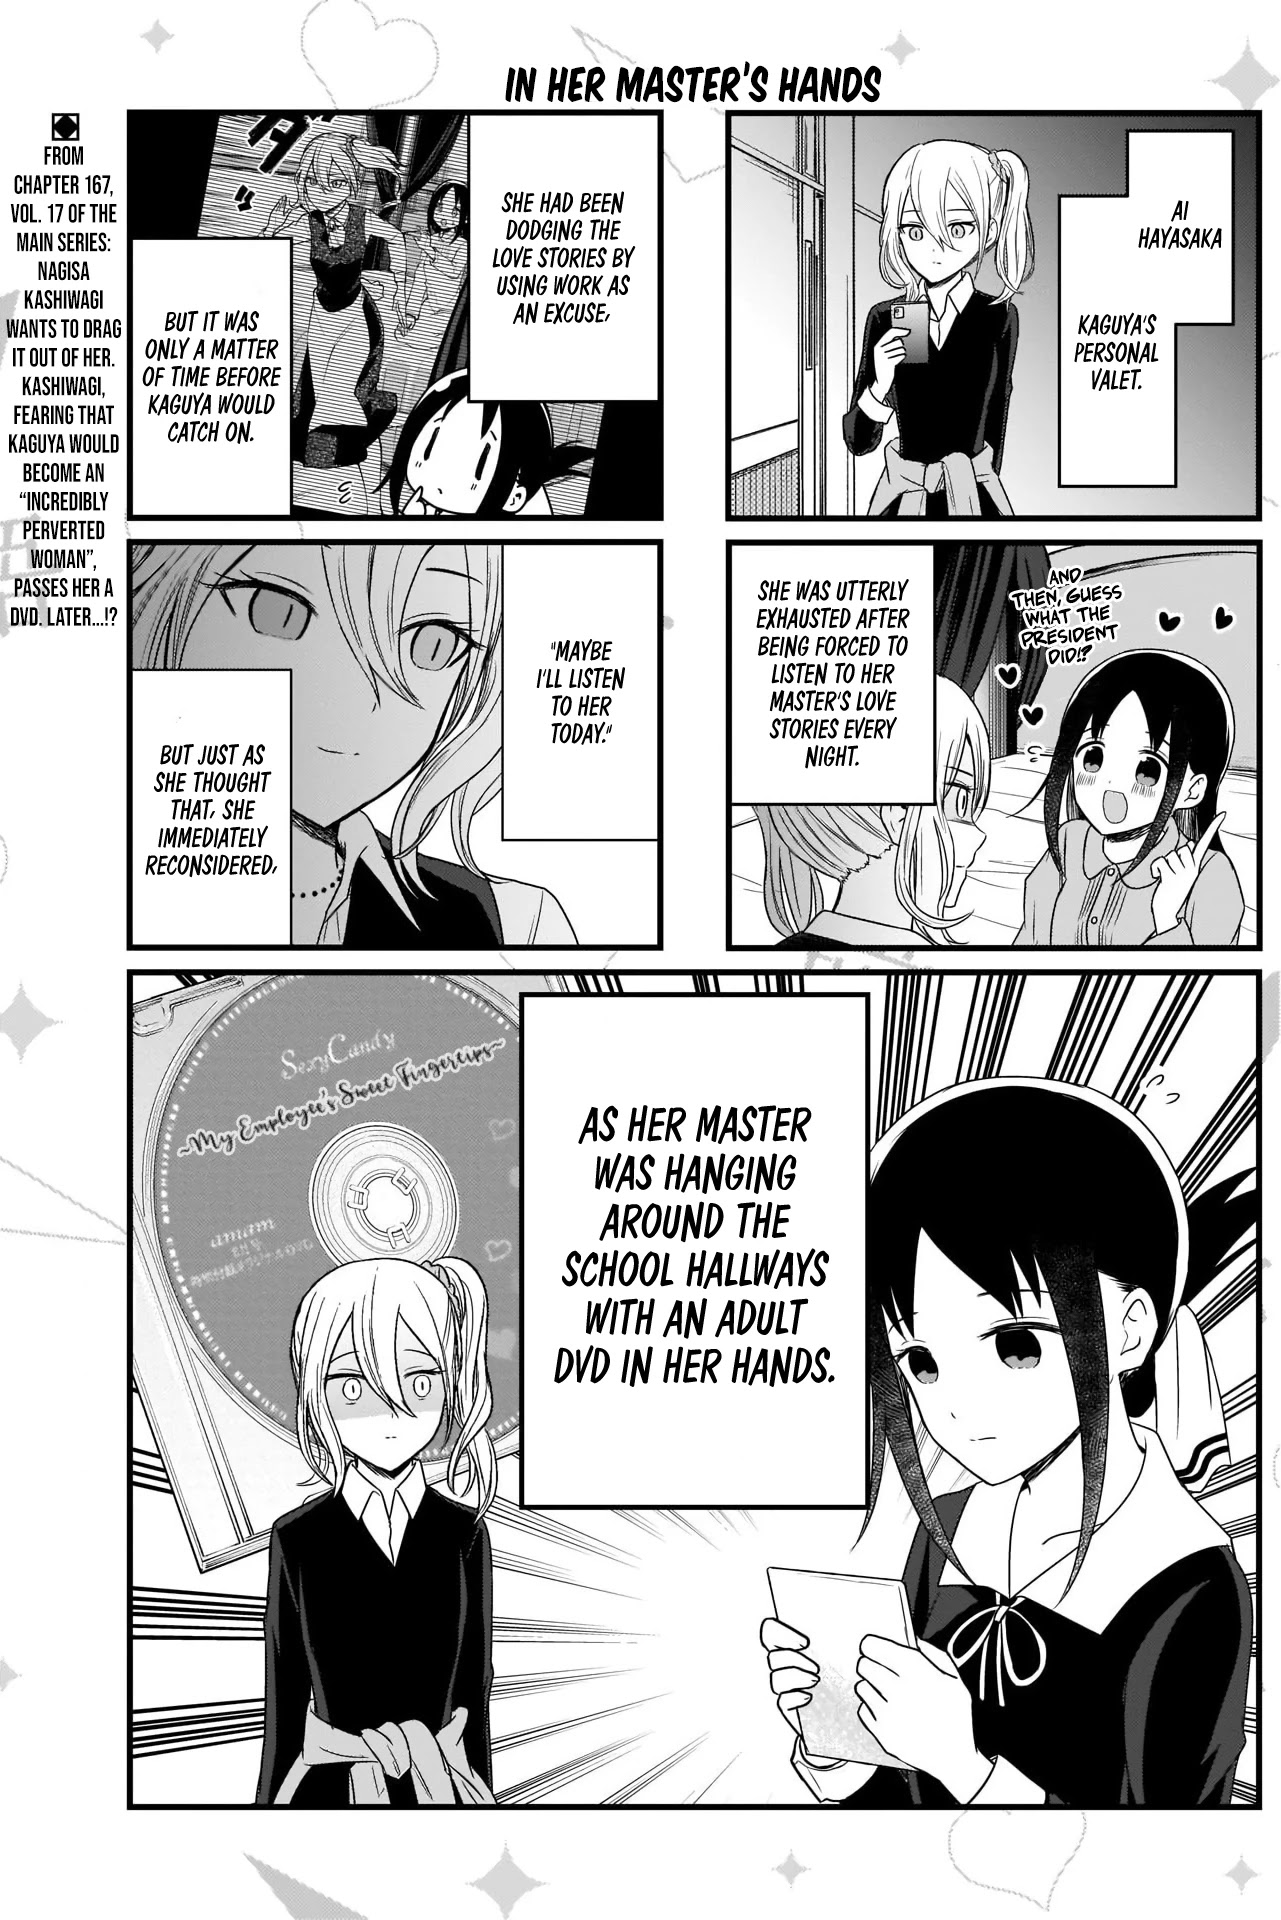 We Want to Talk About Kaguya - chapter 138 - #2